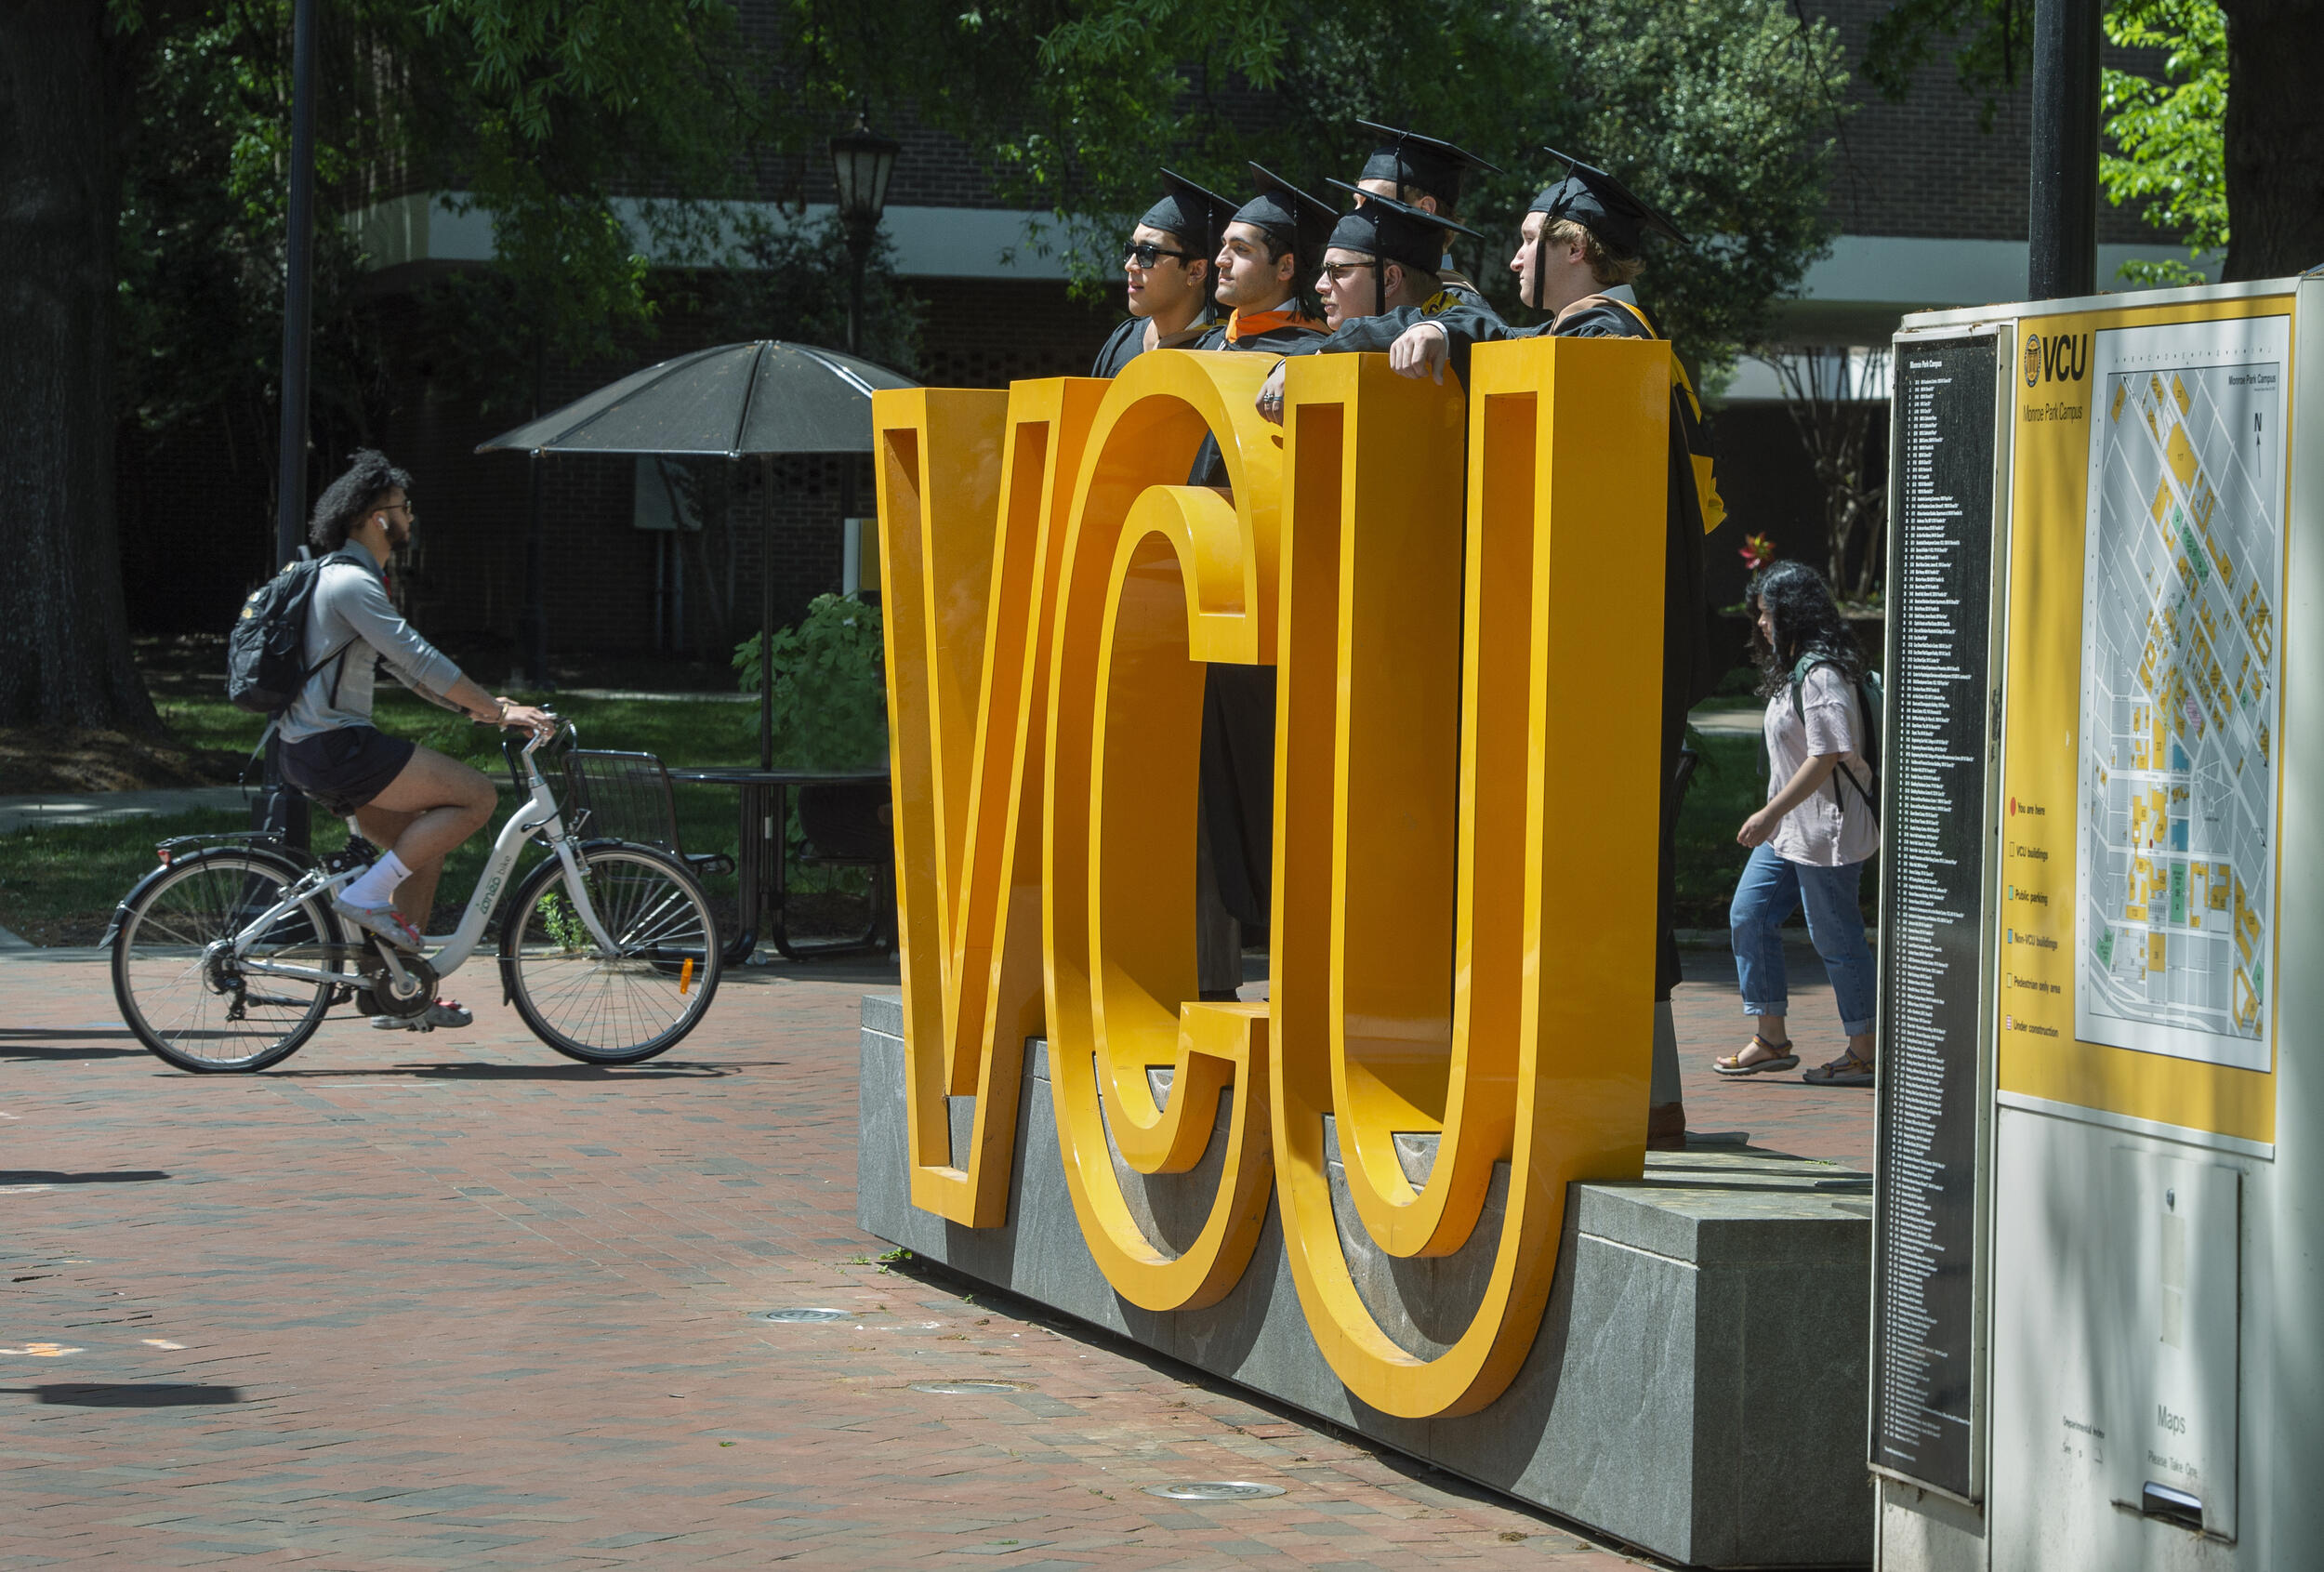 A photo of three people wearing graduation cap and gowns standing behind a sign made of big yellow letters that spell out \"VCU\"